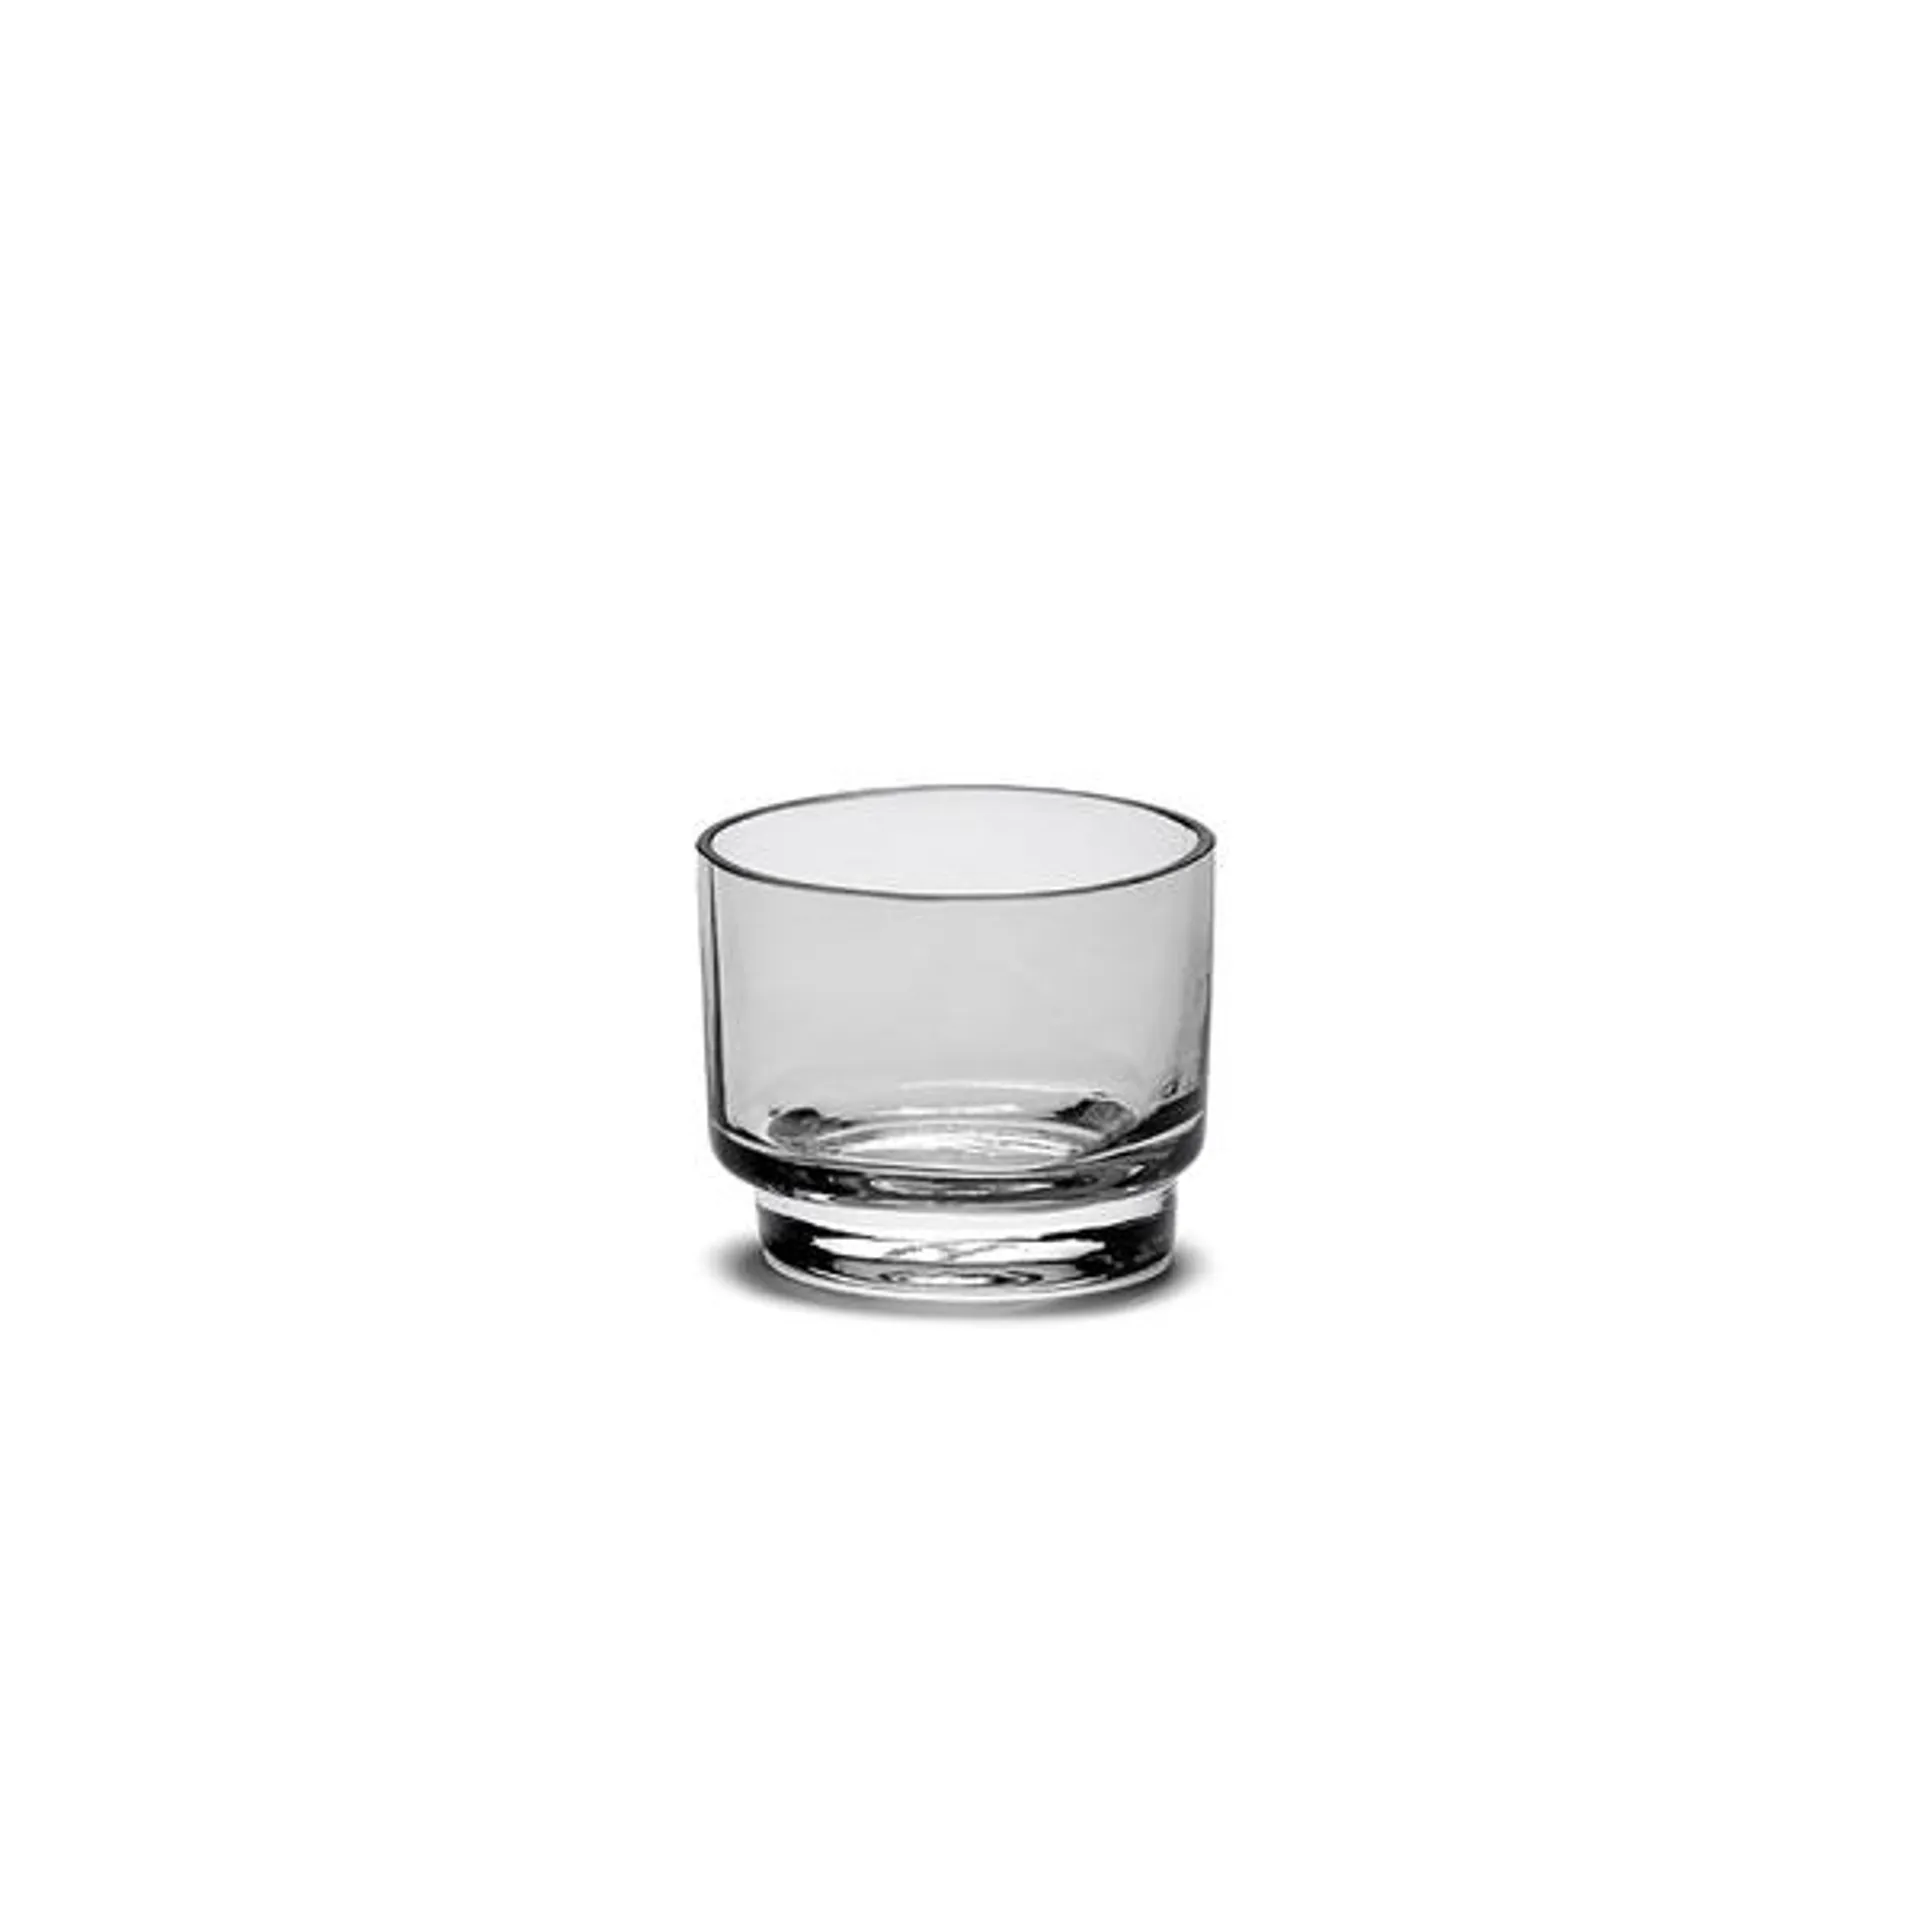 Valerie Objects Inner Circle 15 CL Tumbler Smoky Grey V9020200